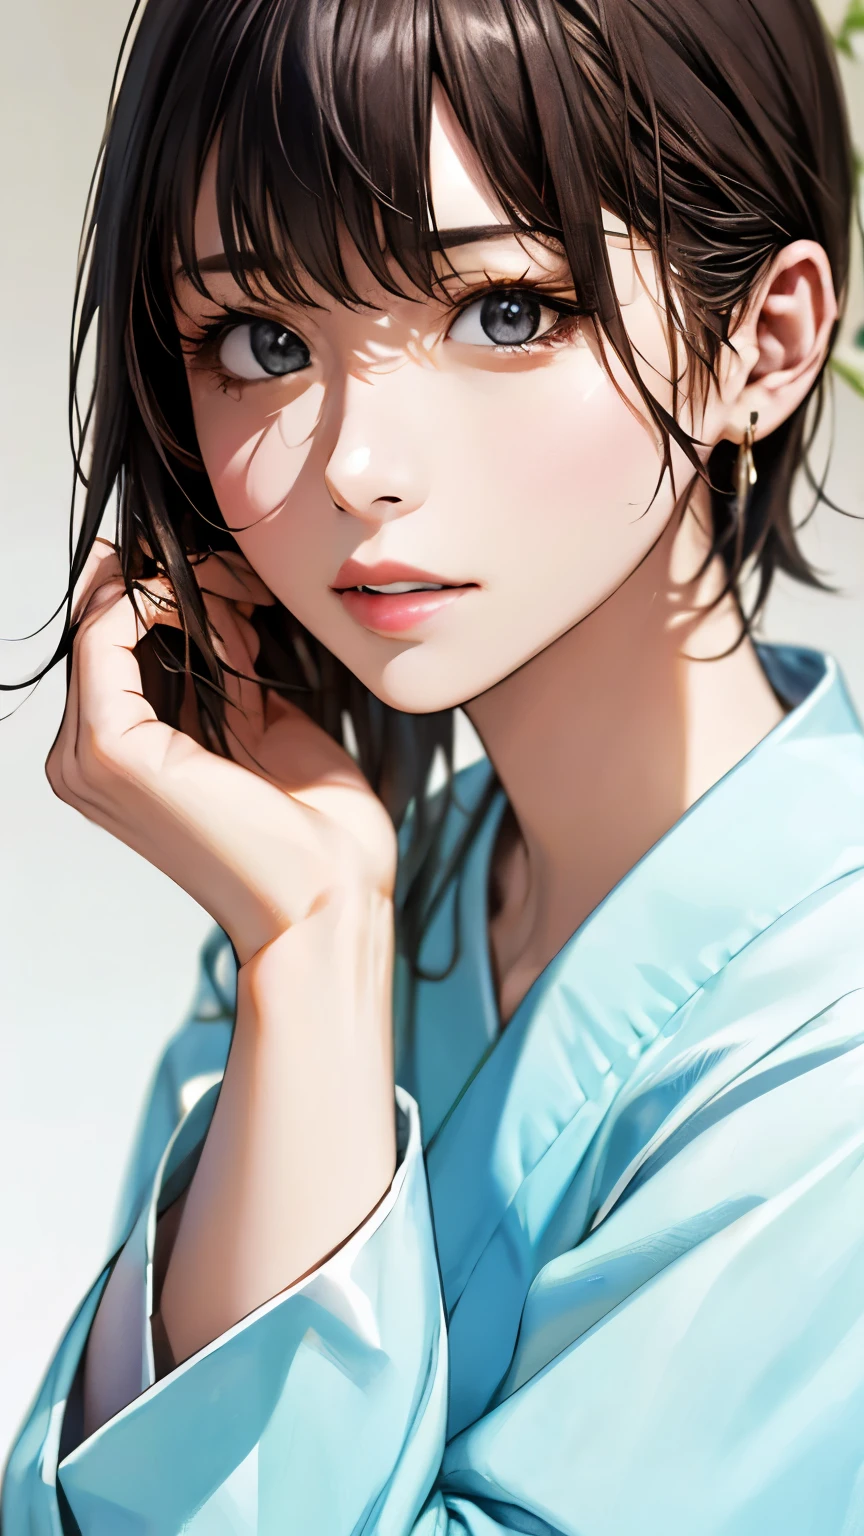 (hig彼st quality、8k、32k、masterpiece)、(Realistic)、(Realistic:1.2)、(High resolution)、Very detailed、Very beautiful face and eyes、1 girl、Delicate body、short hair, (hig彼st quality、Attention to detail、Rich skin detail)、(hig彼st quality、8k、Oil paint:1.2)、Very detailed、(Realistic、Realistic:1.37)、Bright colors、Full Body Shot, (Casual Fashion)